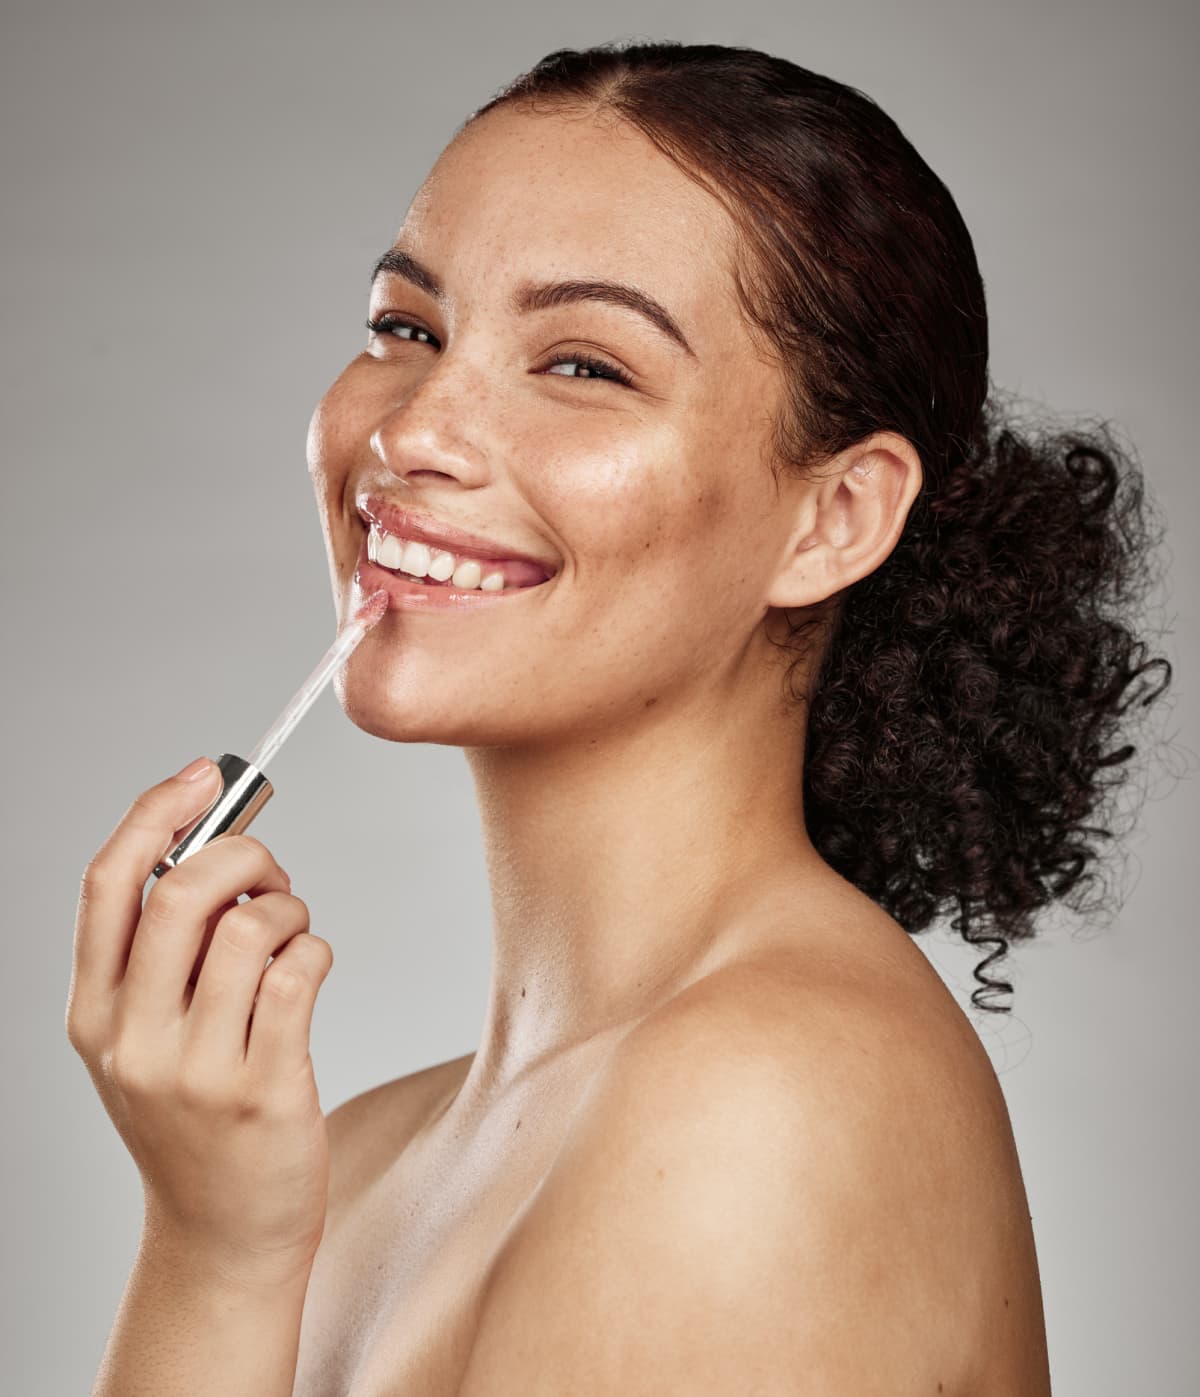 Woman, lipstick and smile for makeup cosmetics, skincare or beauty against a grey studio background. Happy female smiling with teeth in satisfaction for lip, mouth and applying cosmetic treatment